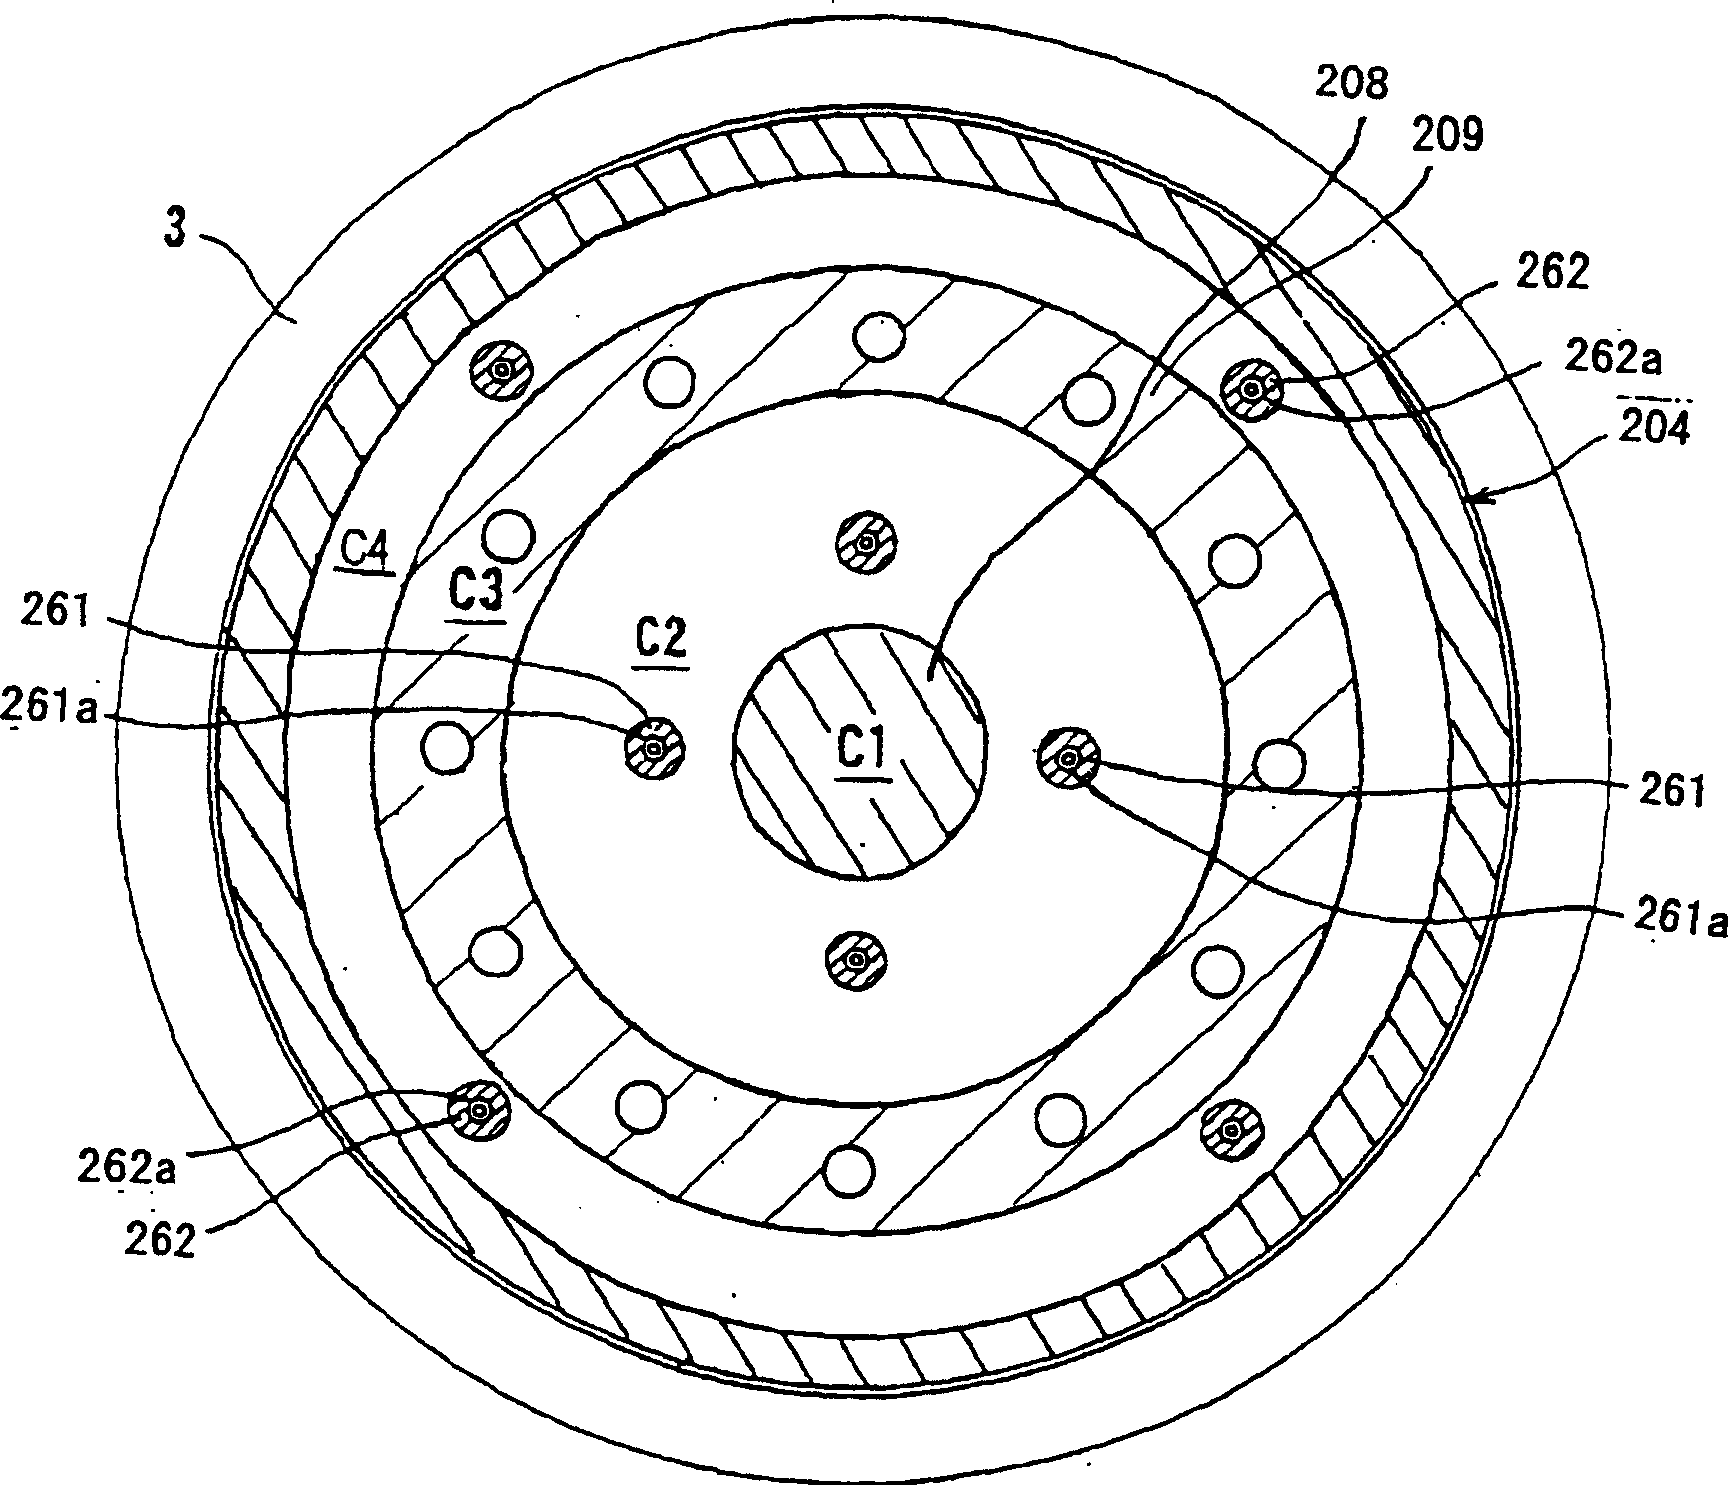 Substrate holding device and polishing device